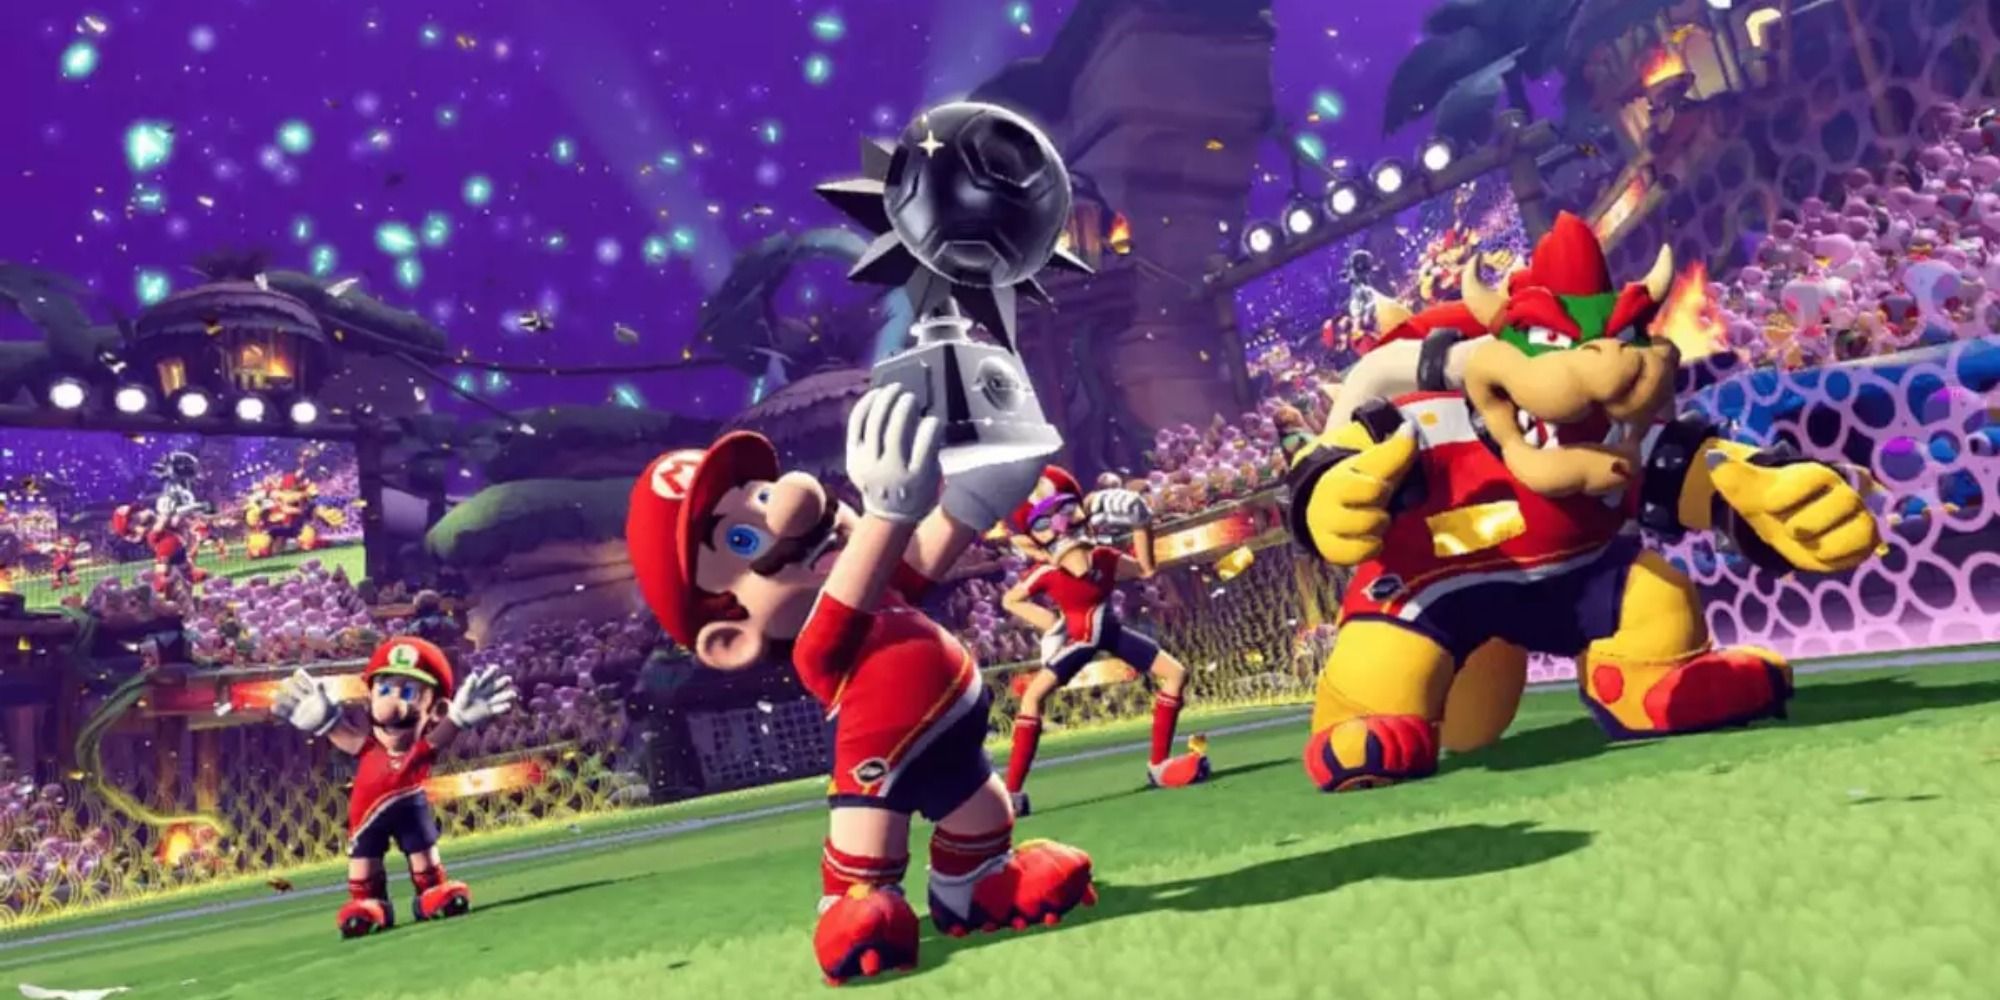 Mario hoisting a Cup Trophy after winning a tournament in Mario Strikers: Battle League